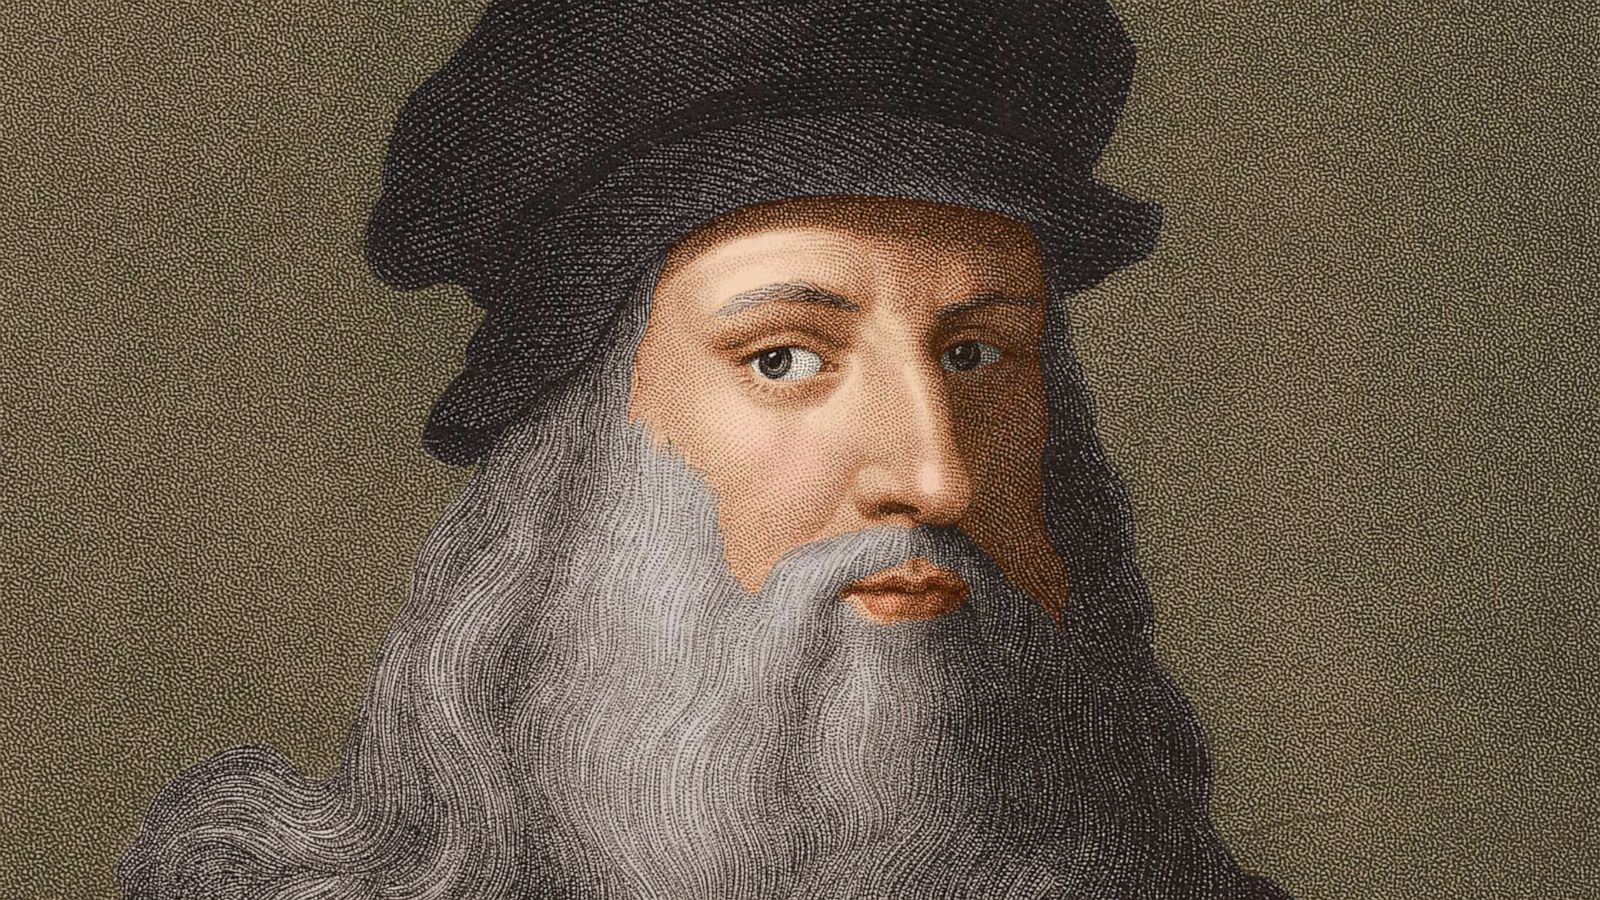 Leonardo da Vinci remembered 500 years after his death as French-Italian feud over artwork continues - ABC News